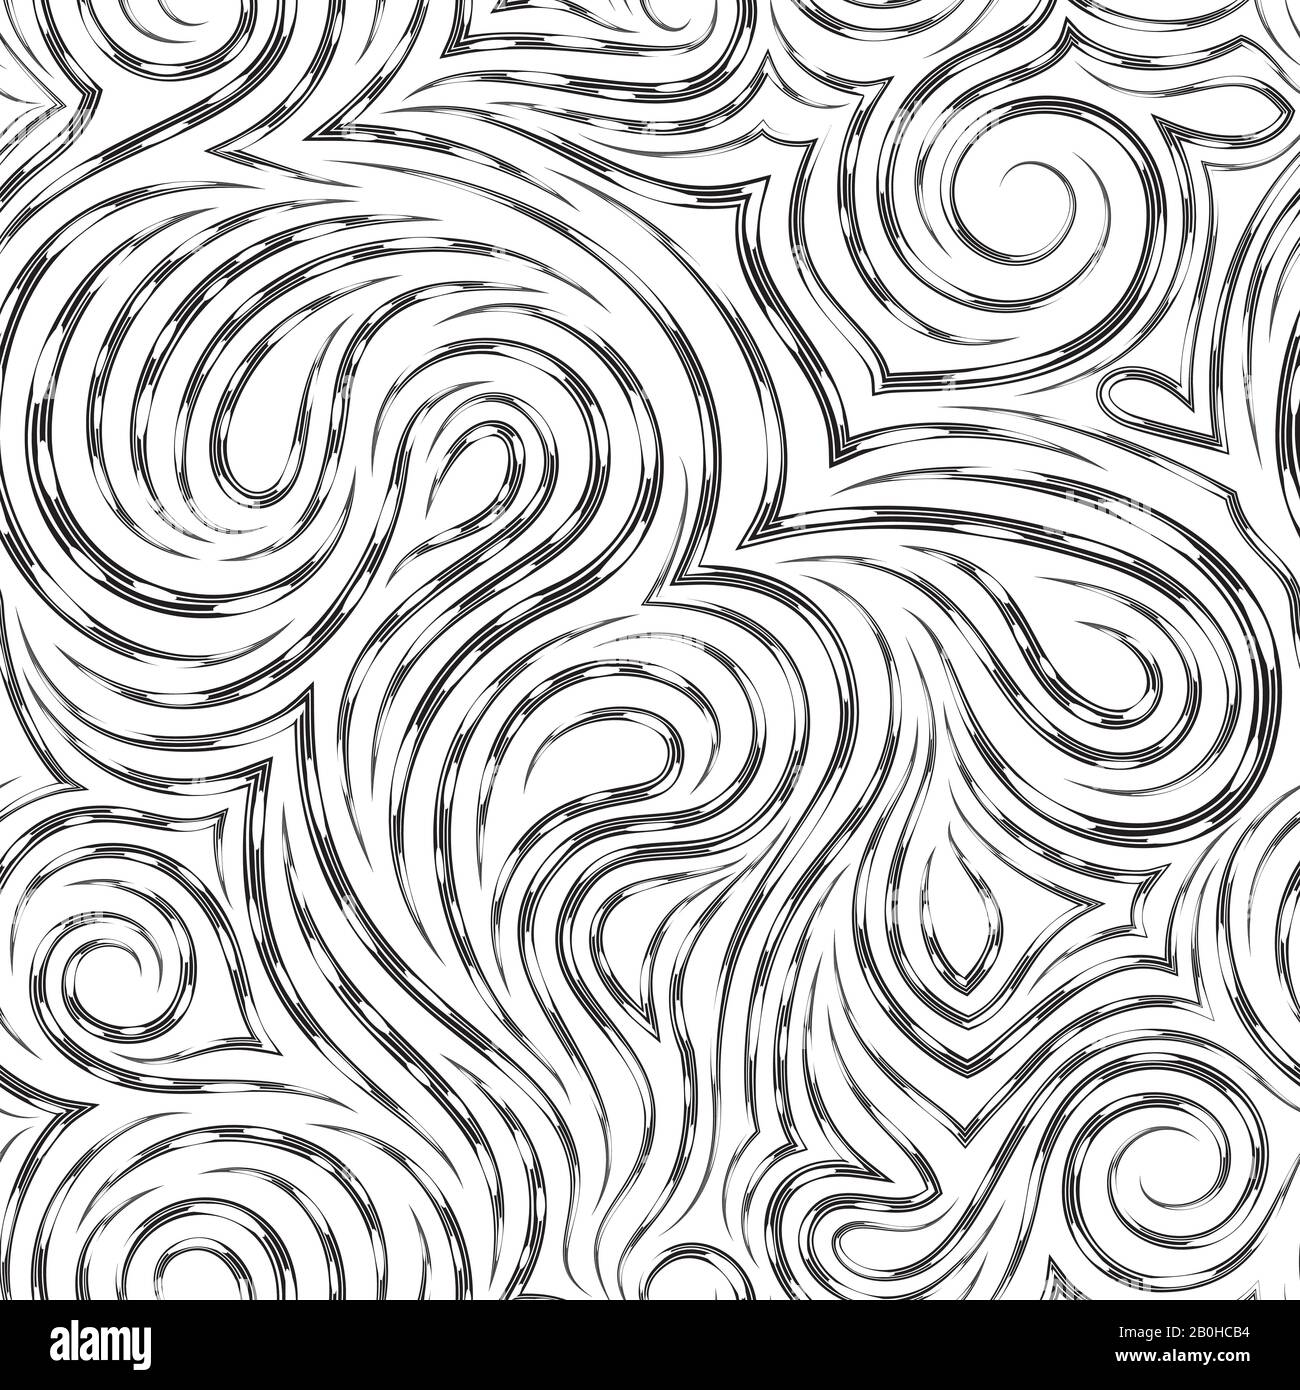 Swirly line curl patterns isolated on white background. Vector